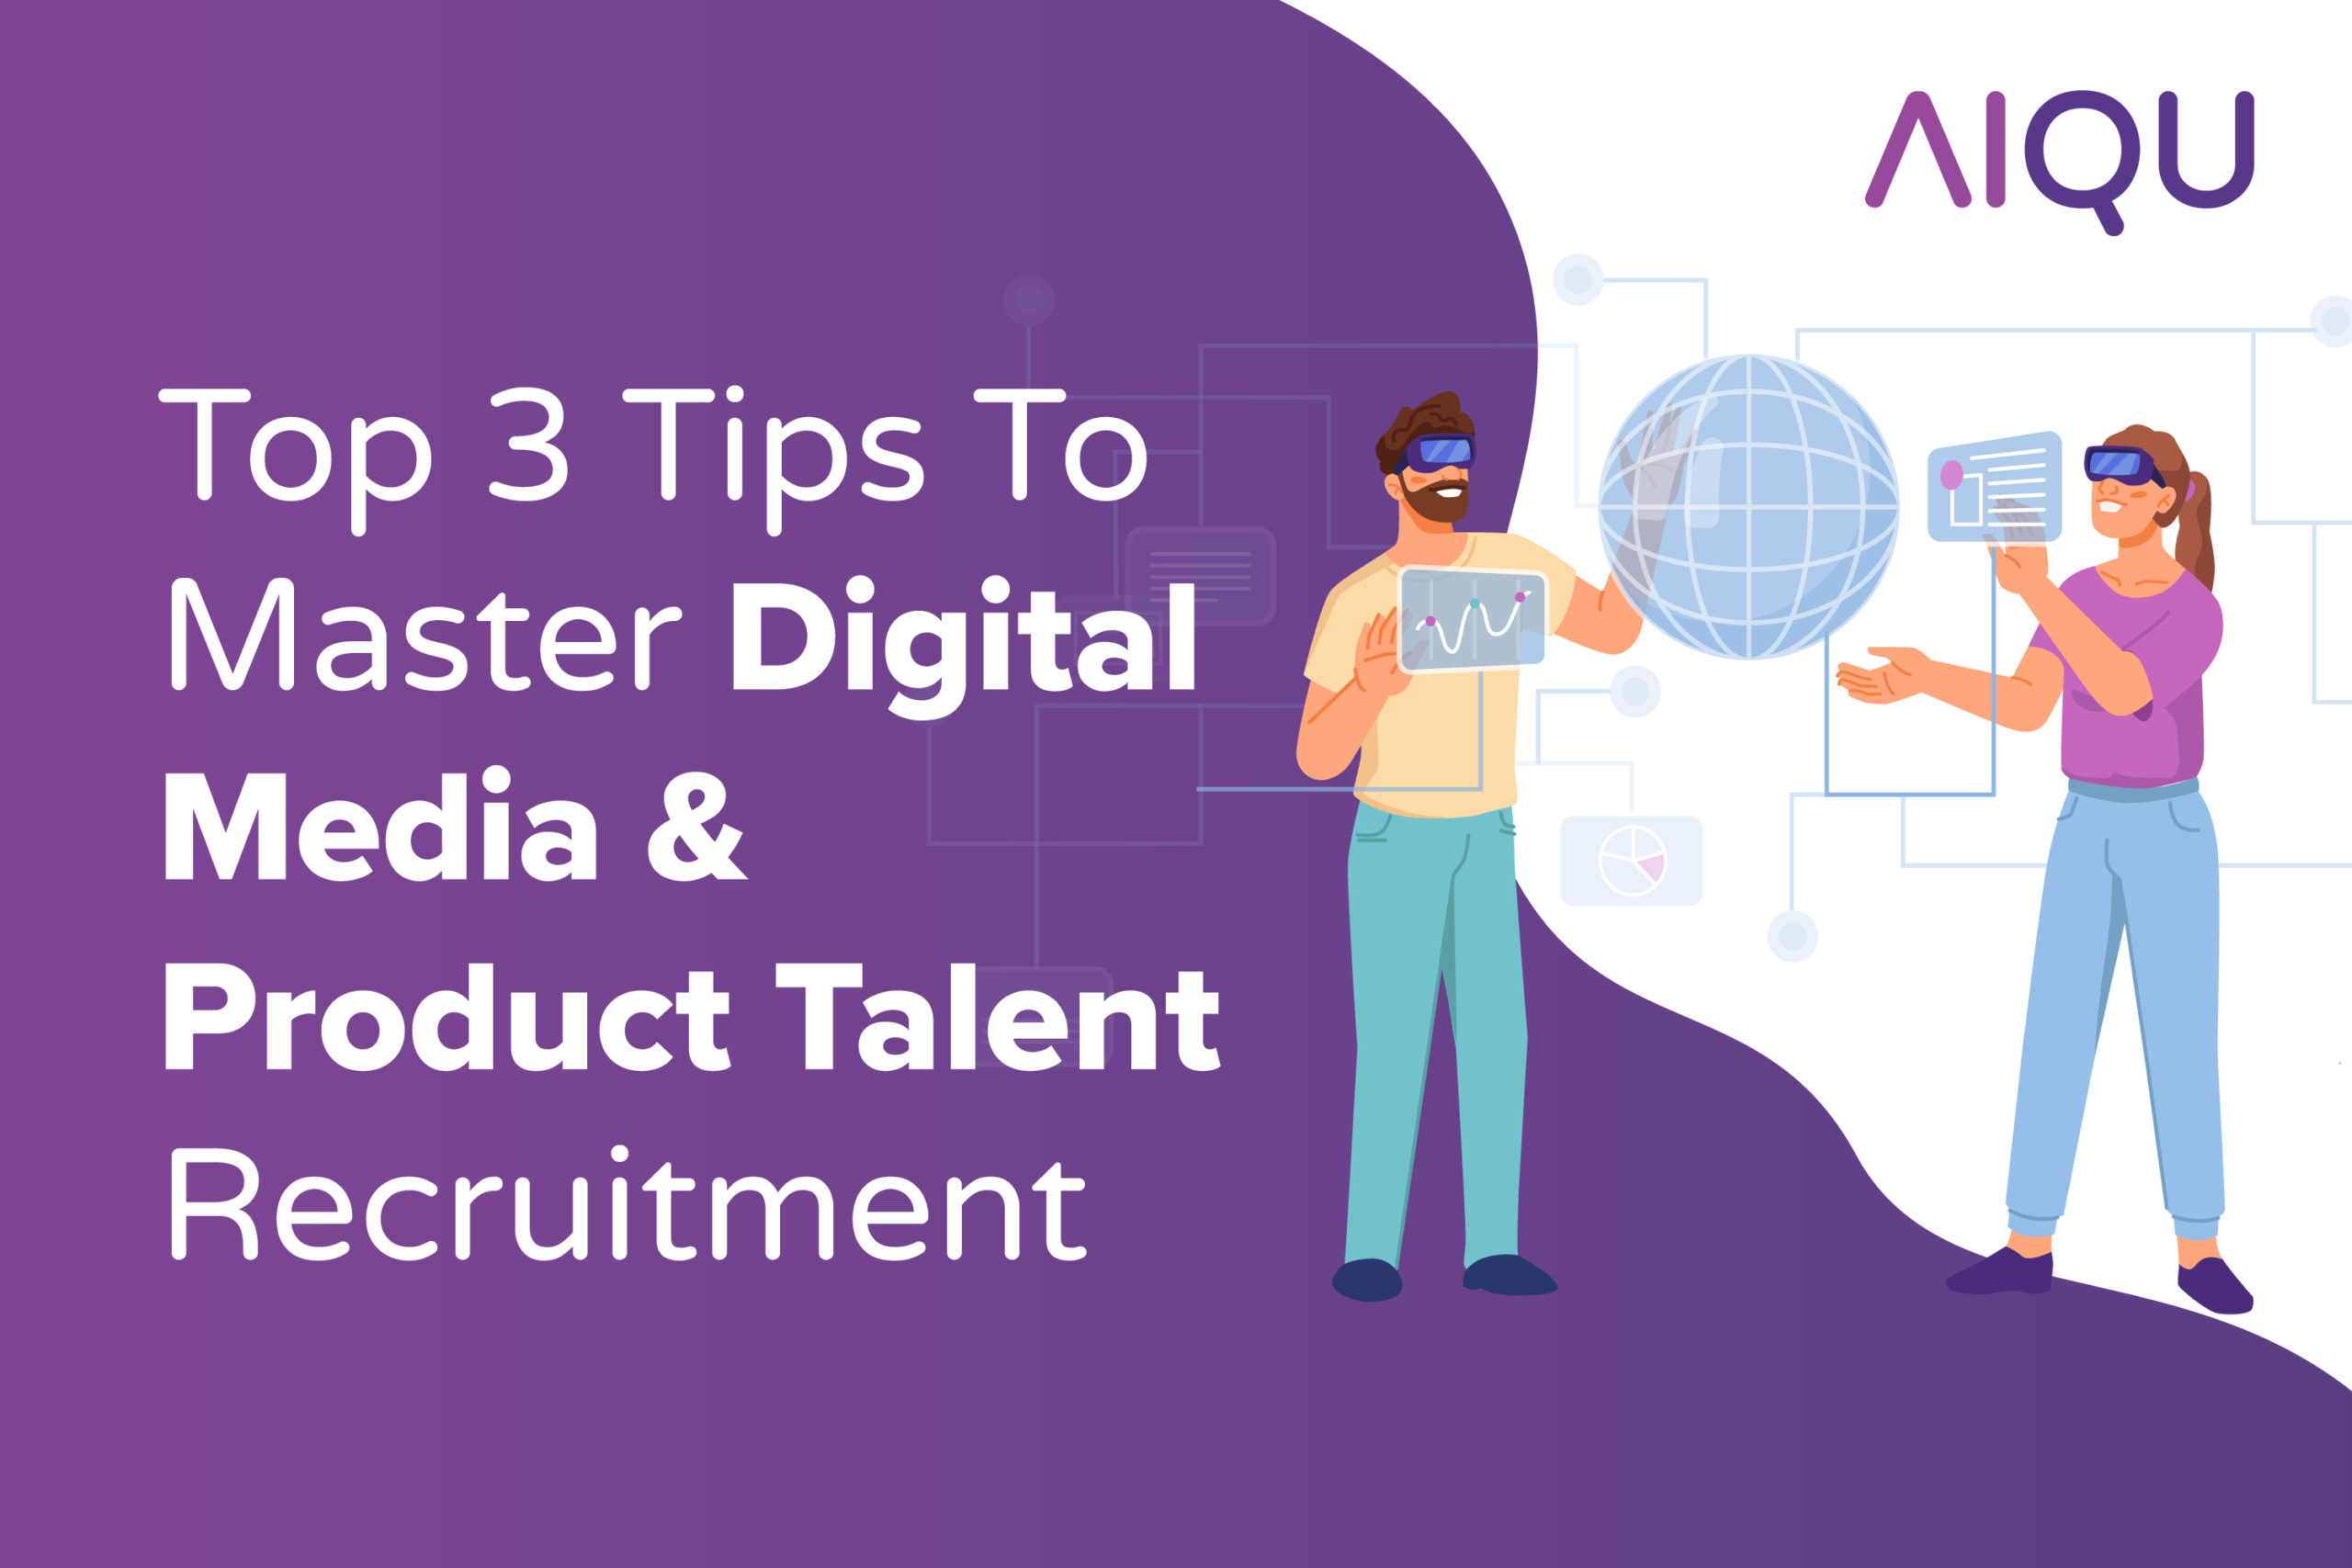 Top 3 Tips To Master Digital & Media Product Recruitment